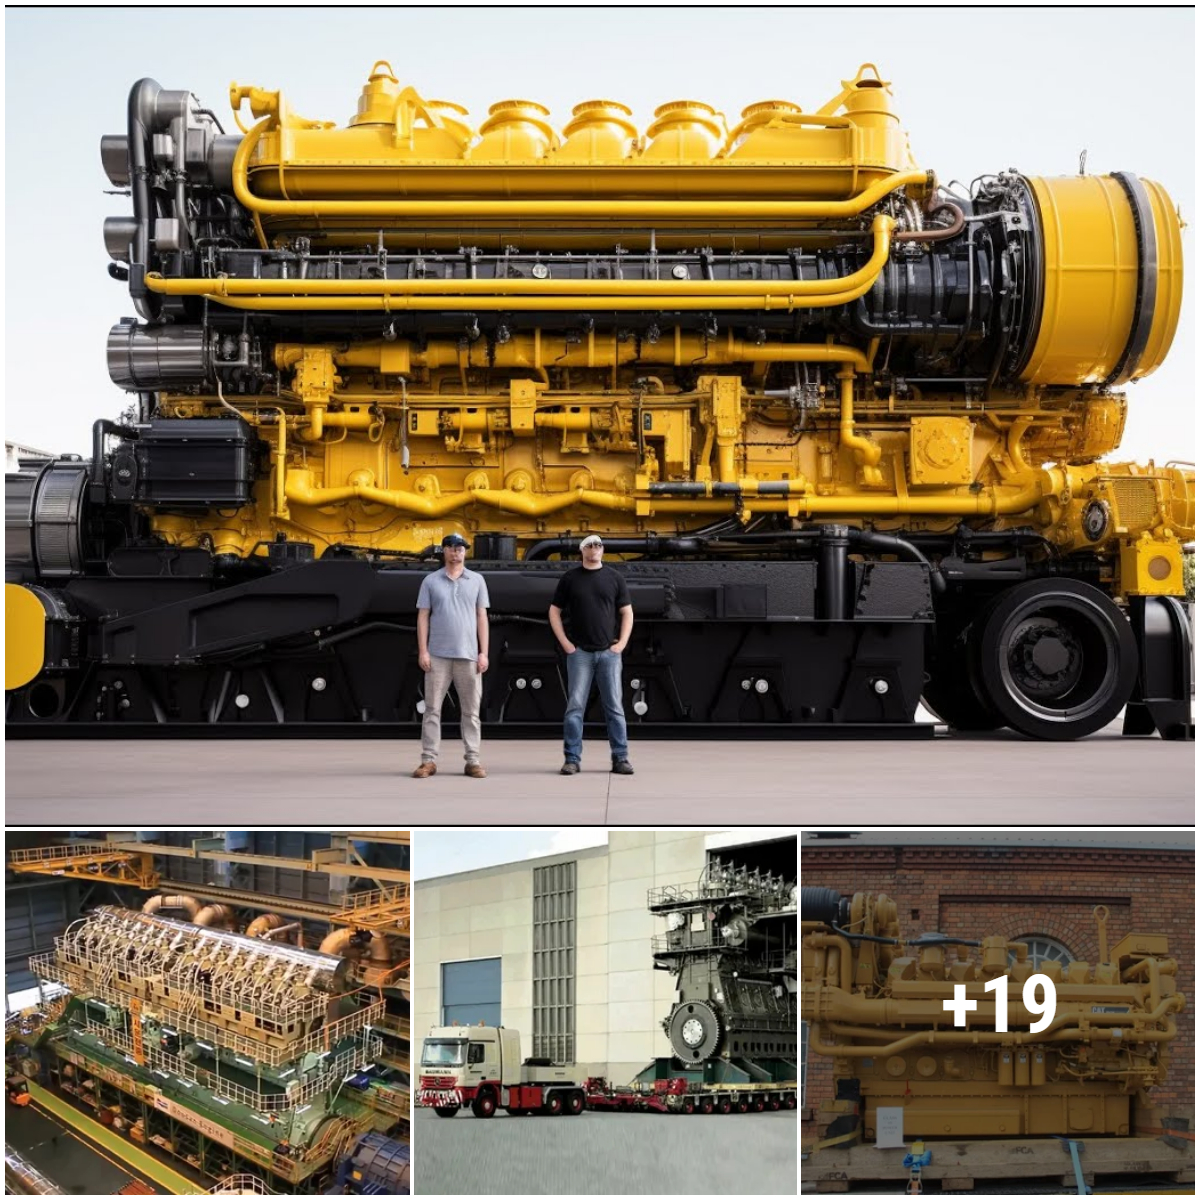 The engineering giant’s 107,389 horsepower wonder diesel is considered the most powerful engine in the world